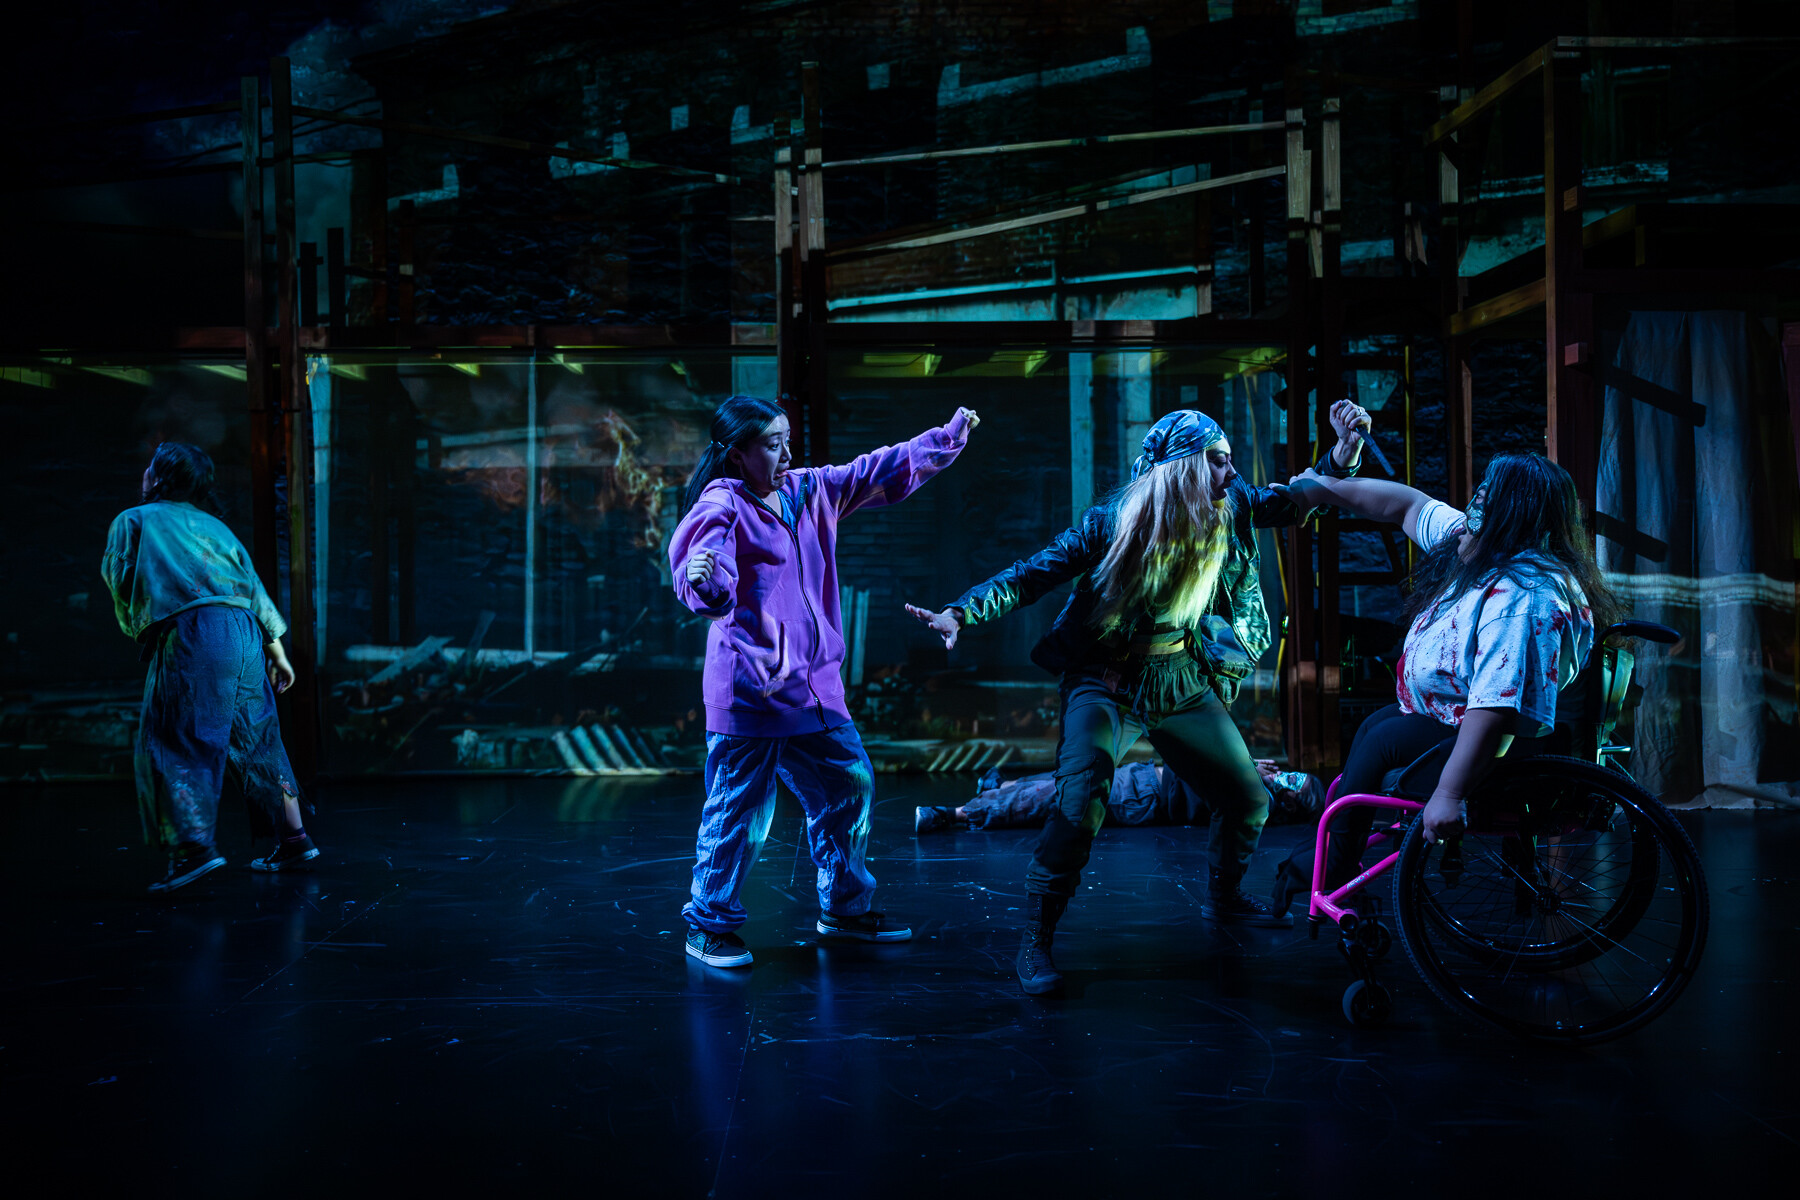 On stage, a performer in a wheelchair grabs the arm of another performer in a stage fight, while three other performers in various states of shock or injury are scattered around the space.